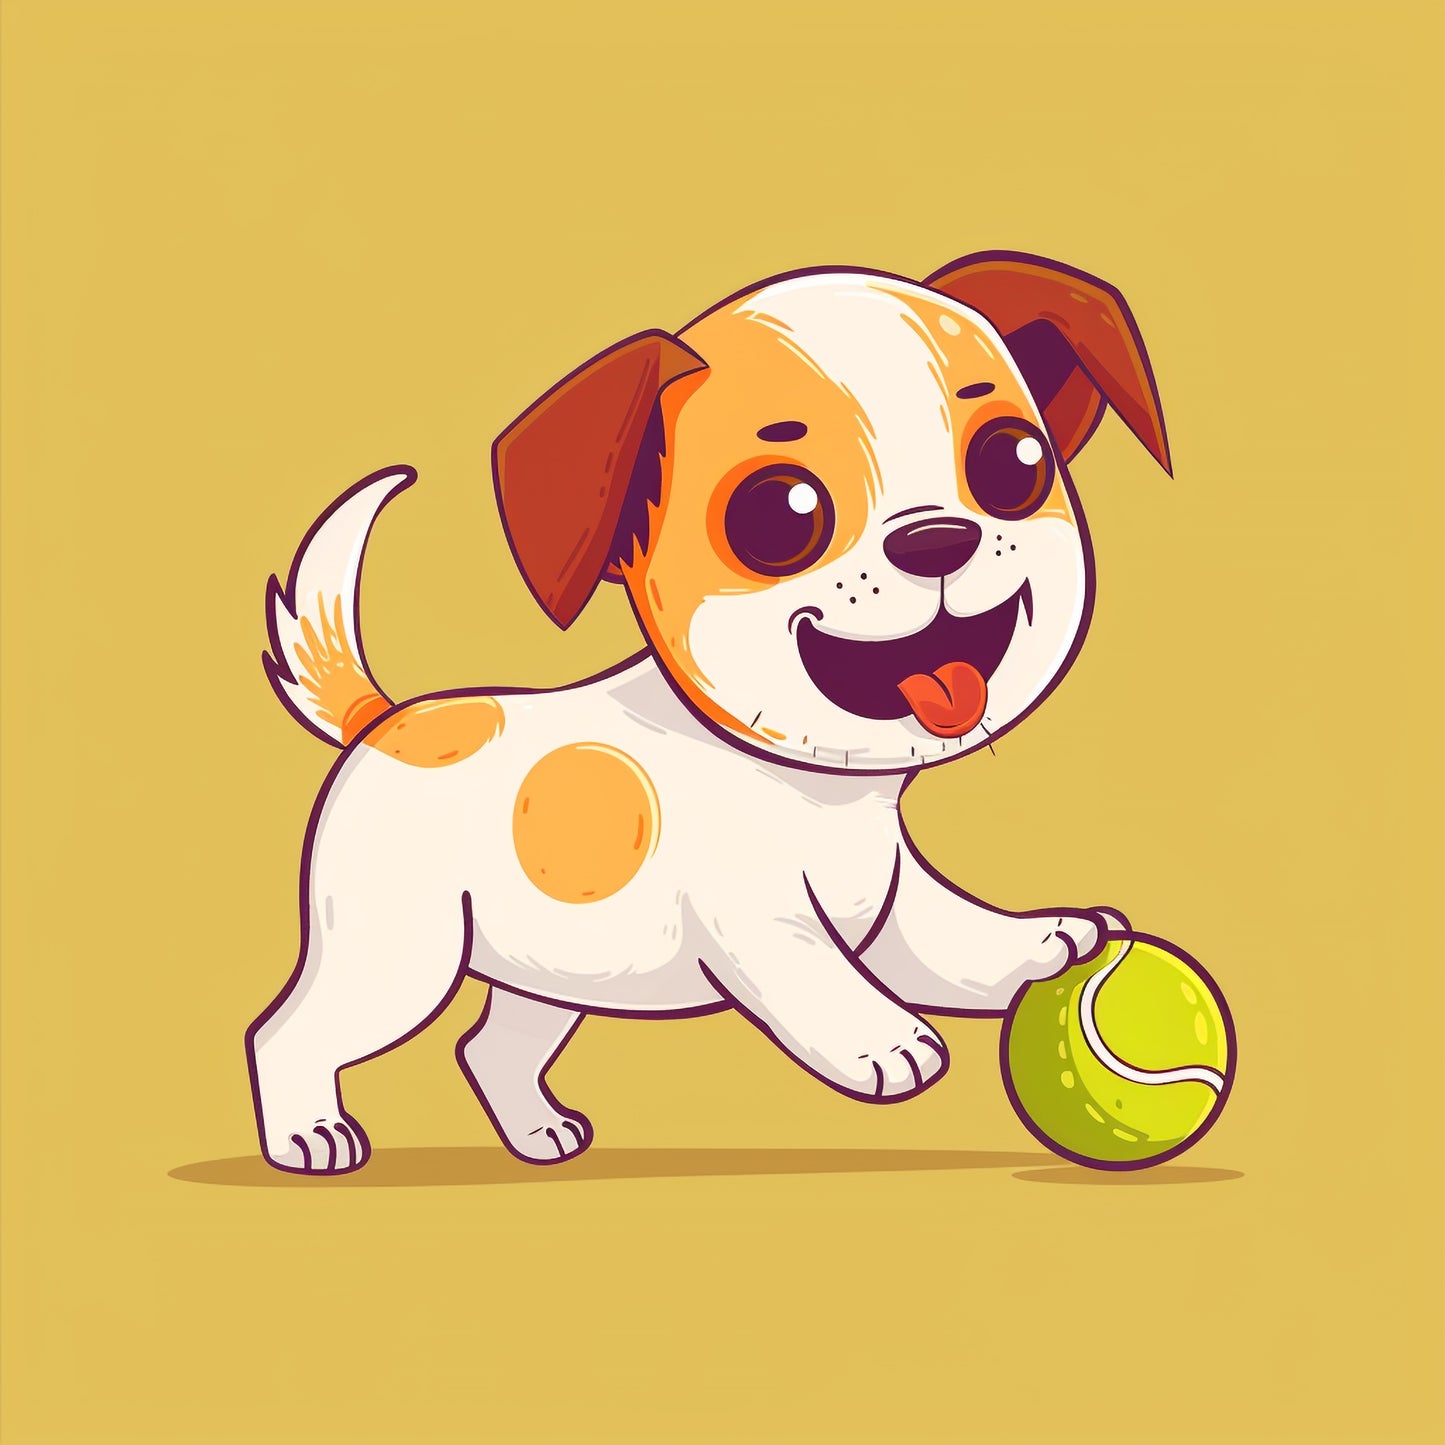 Adorable Puppy Playing with Bright Tennis Ball